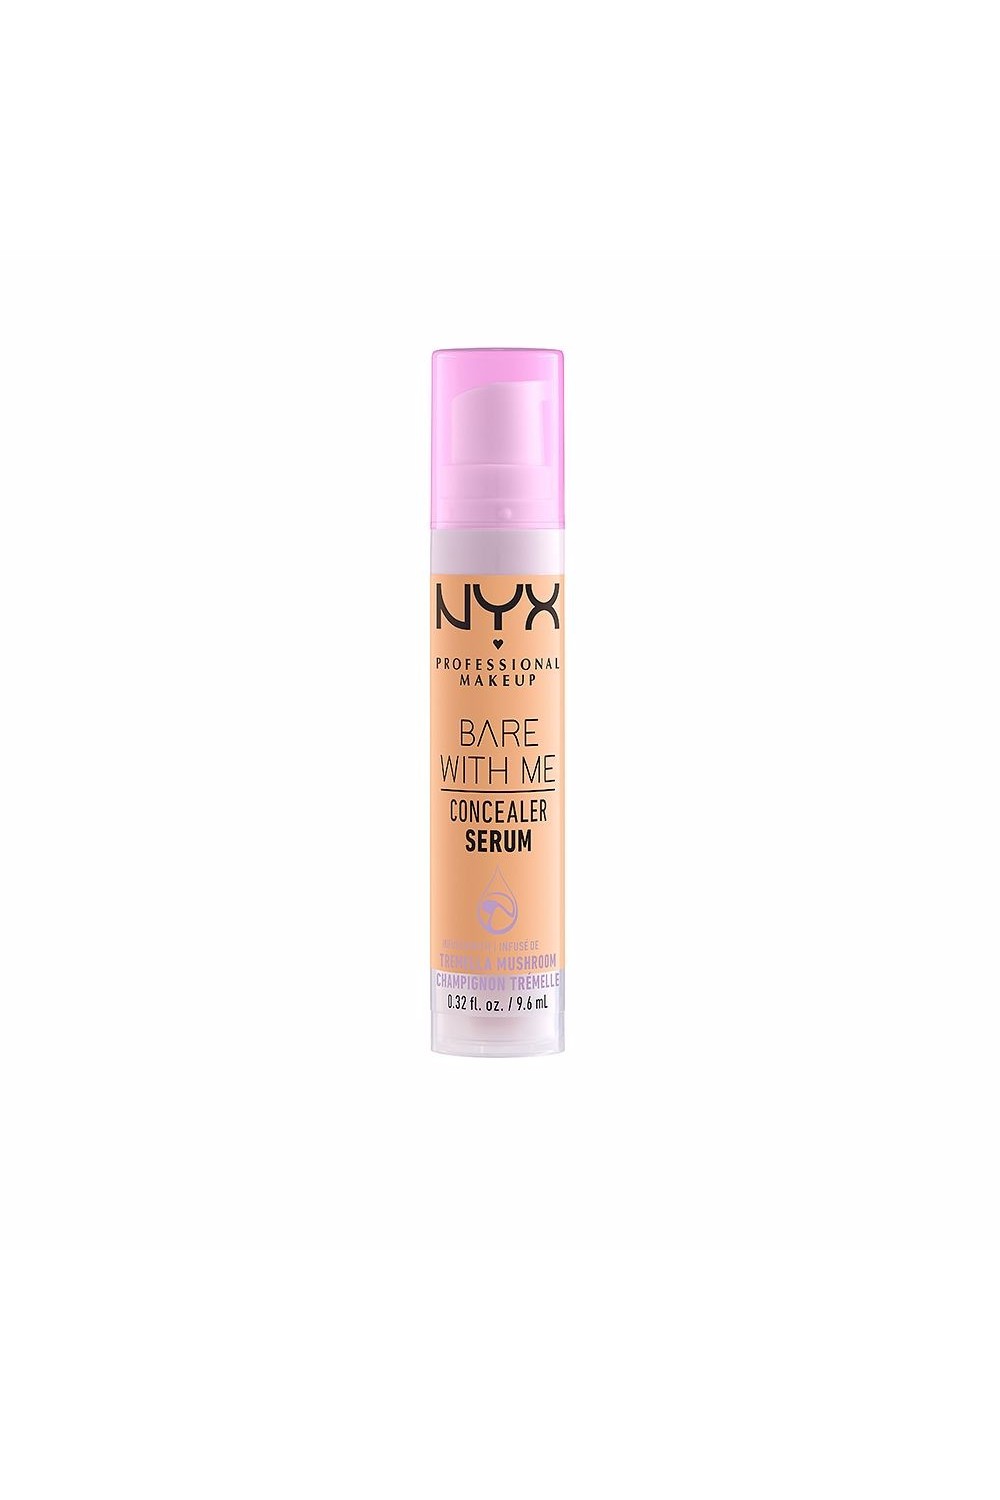 Nyx Bare With Me Concealer Serum 06-Tan